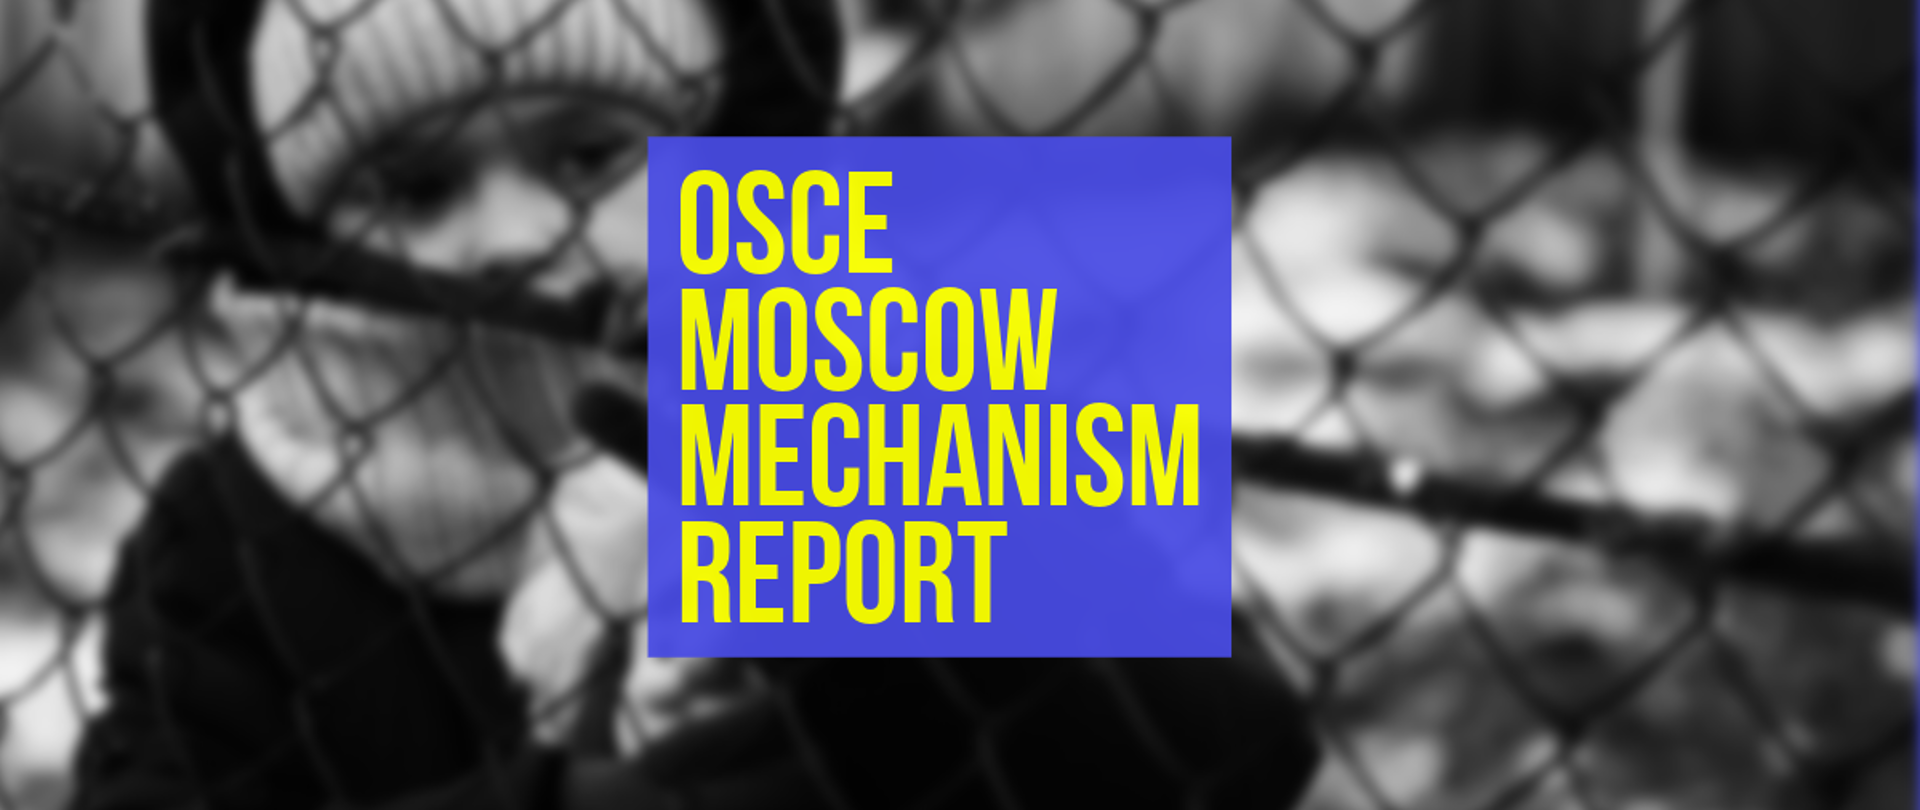 OSCE Moscow Mechanism Report